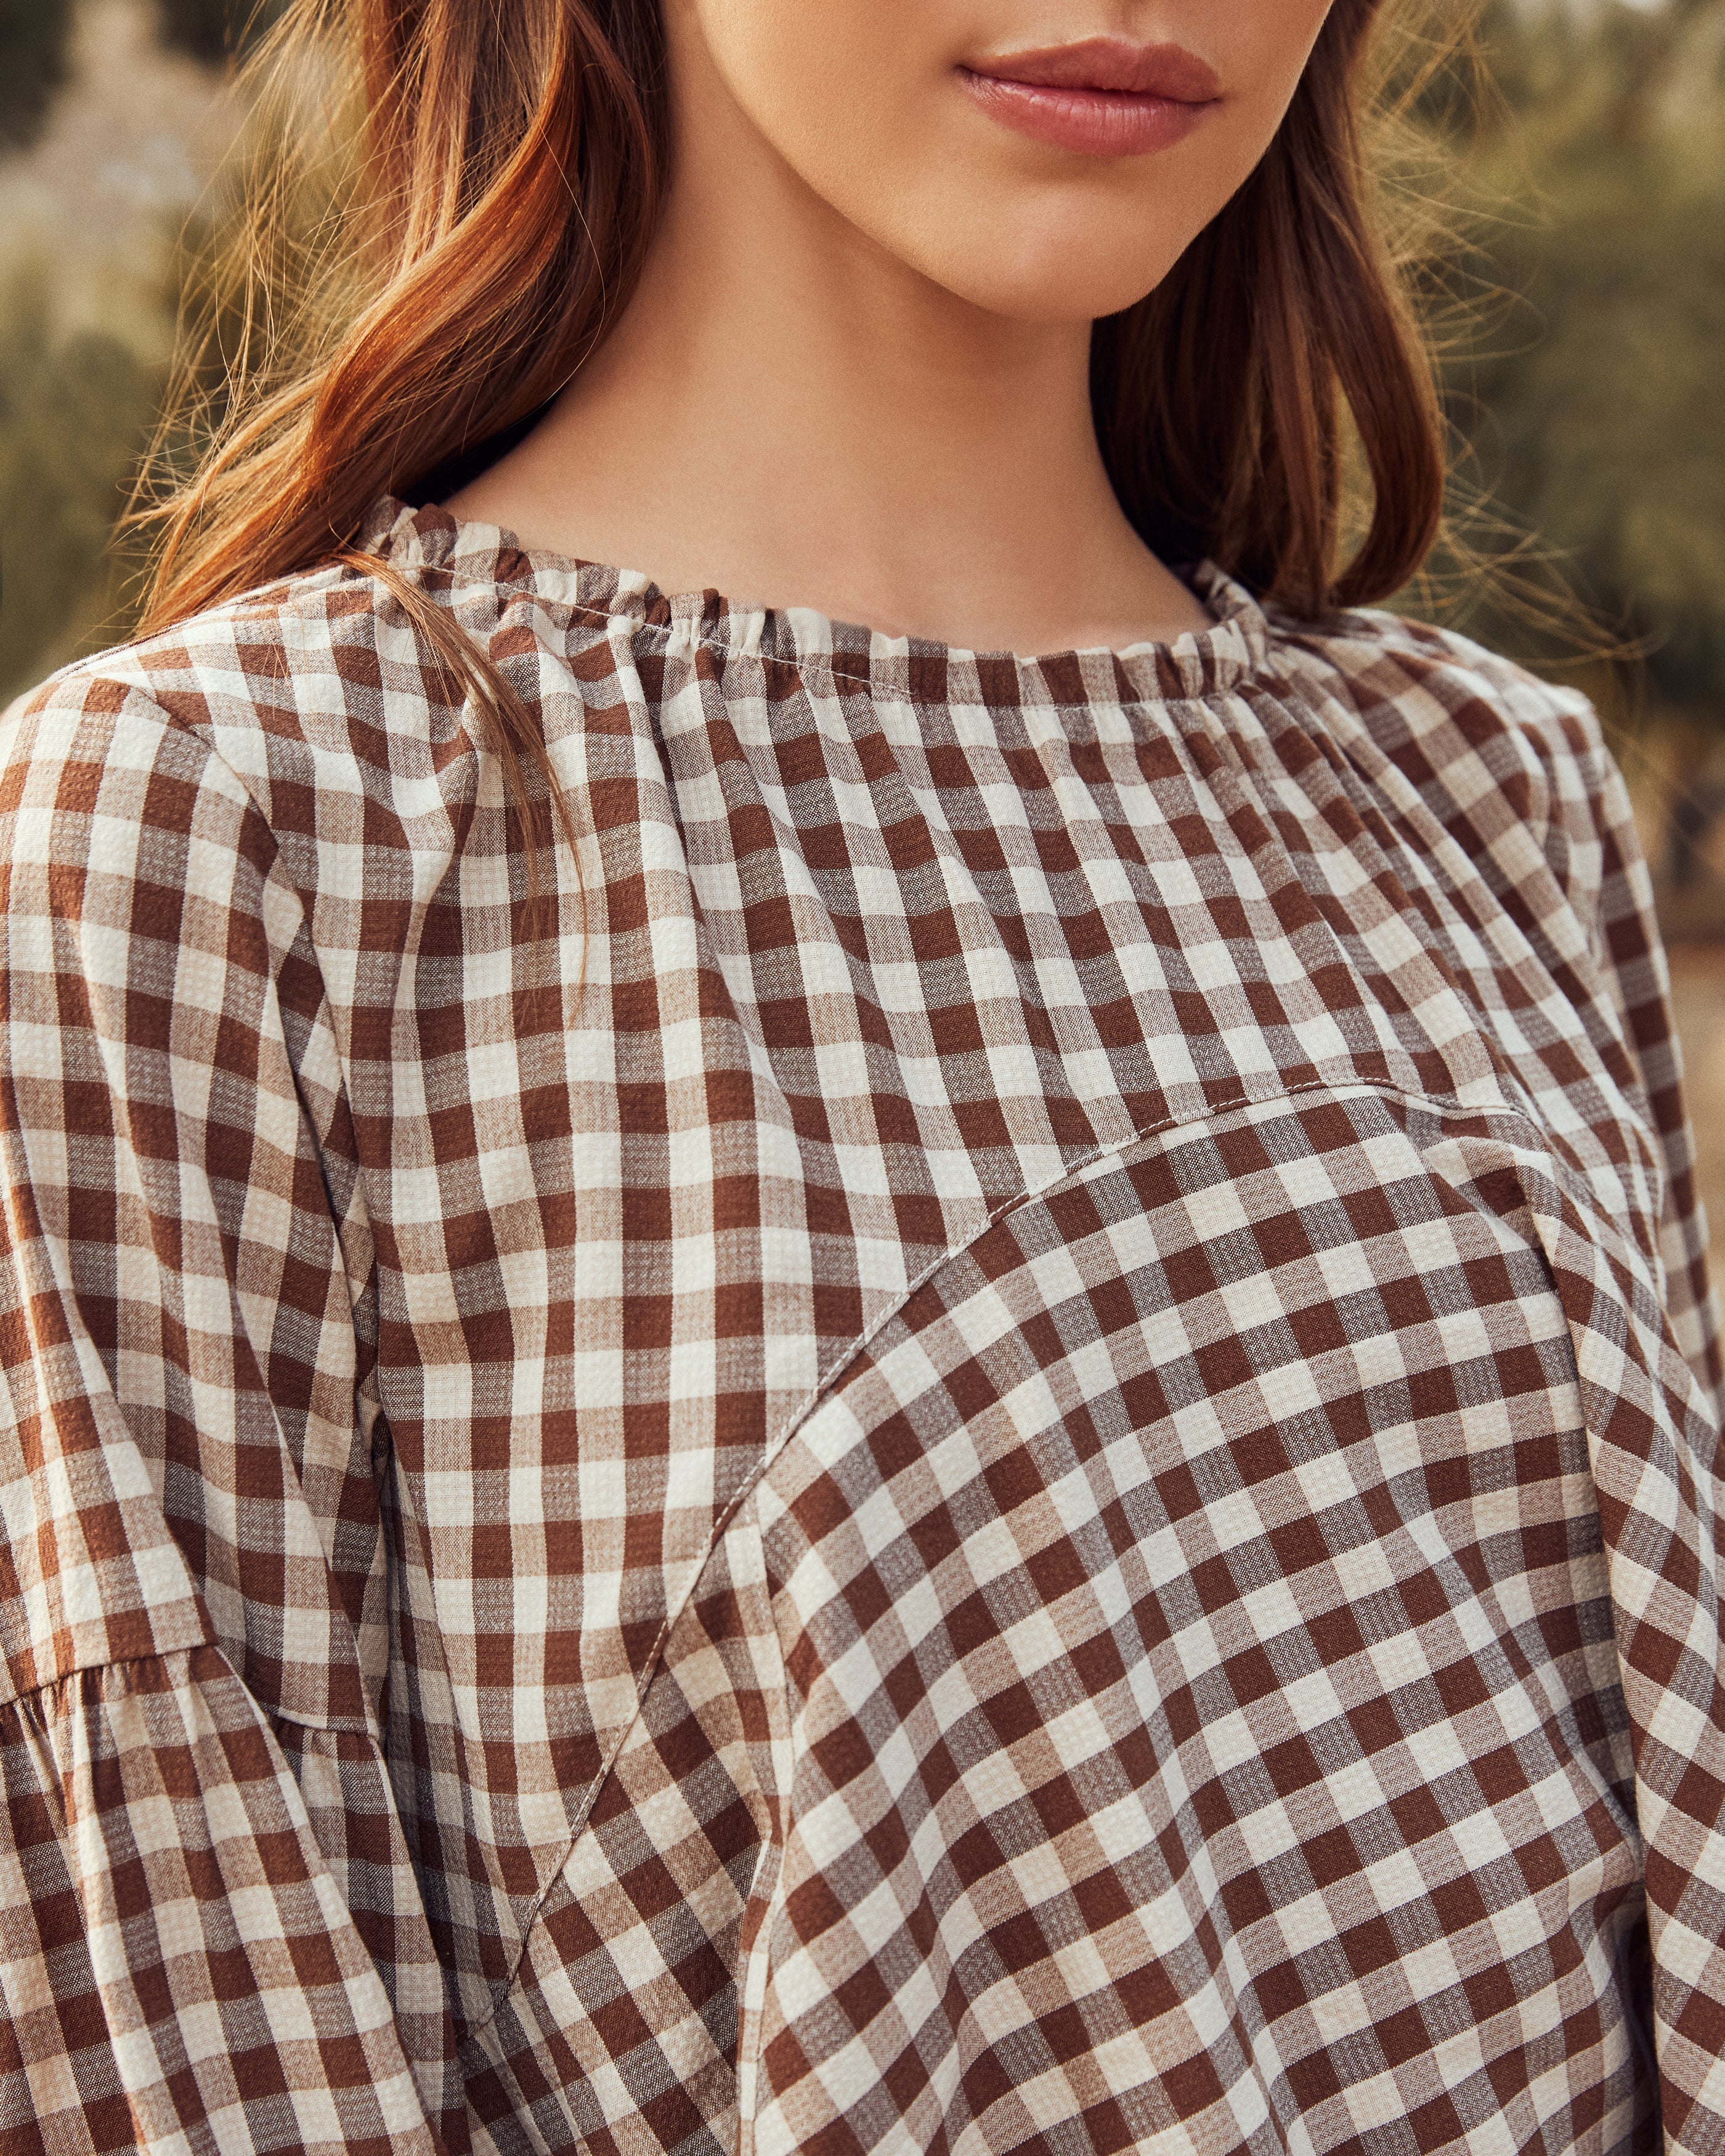 Tensey Checkered Babydoll Blouse - FINAL SALE FATE-001